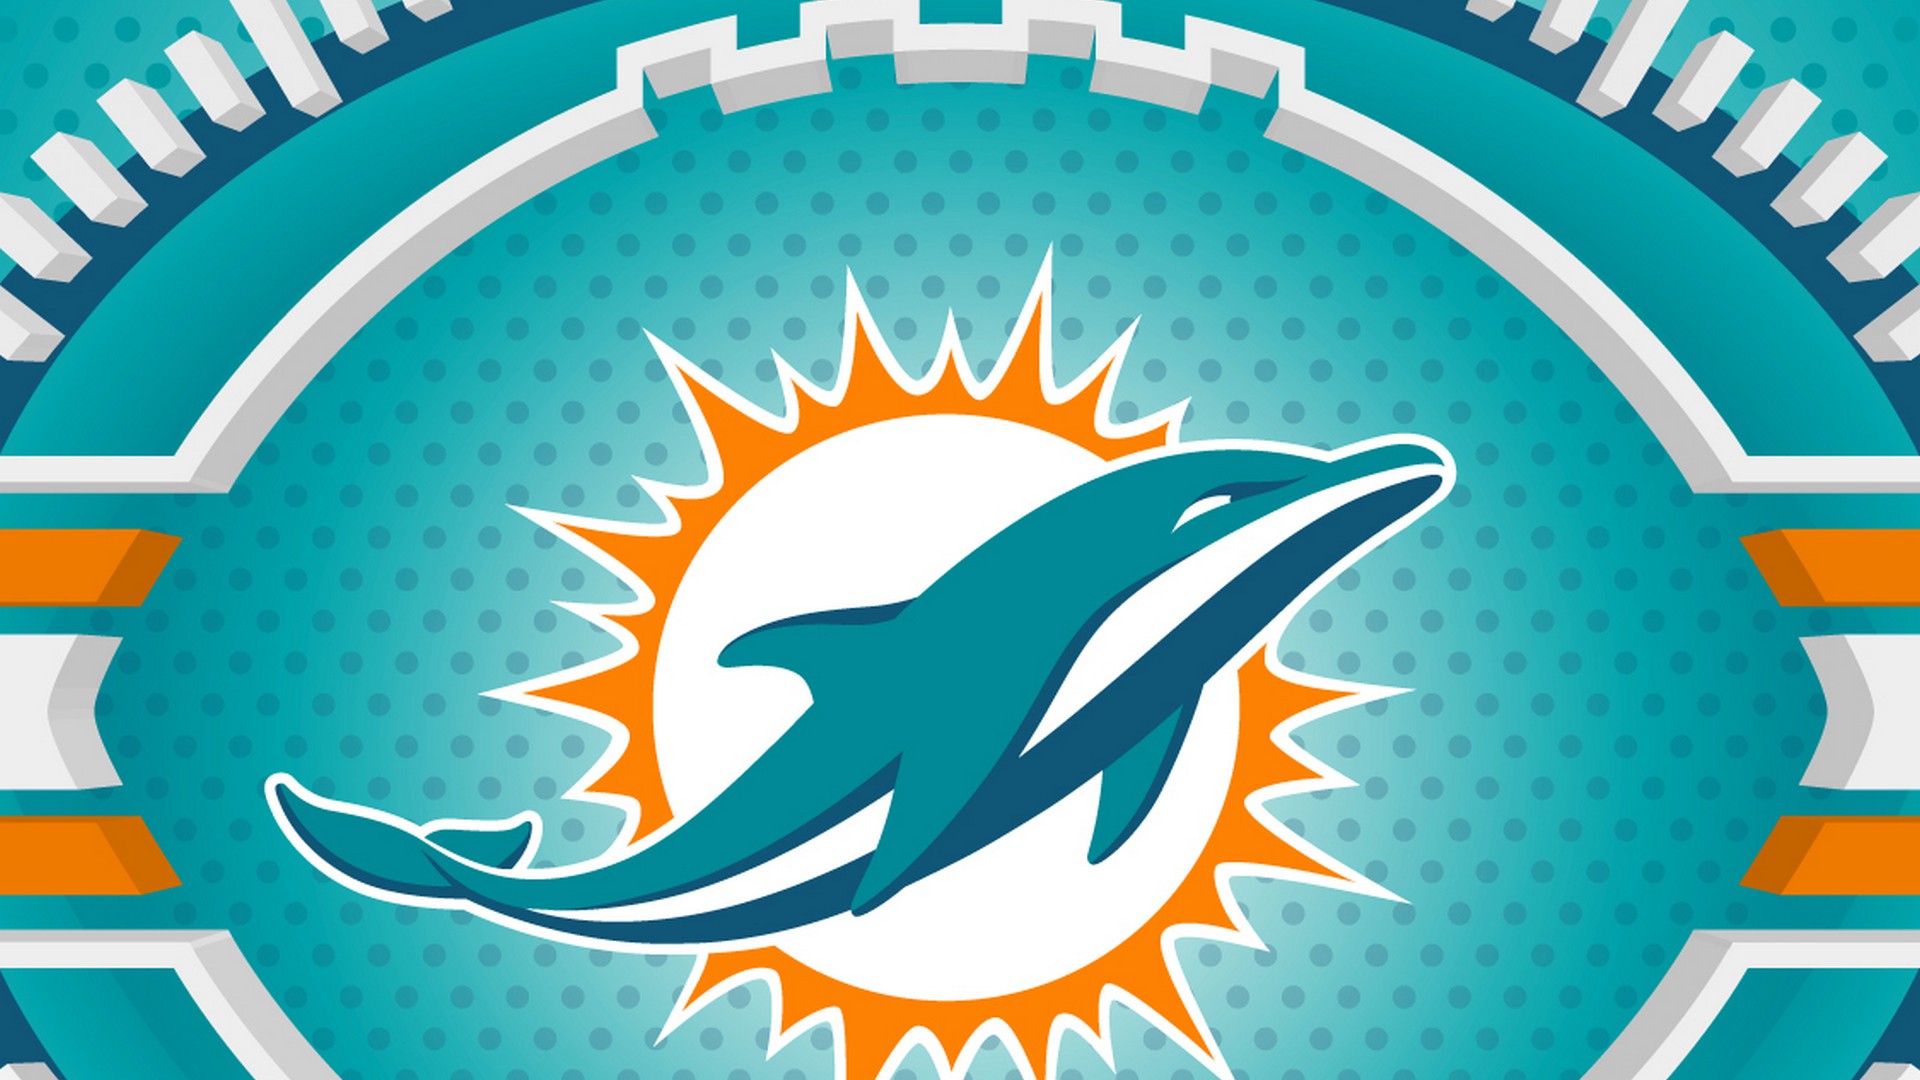 Miami Dolphins Desktop Wallpaper With Resolution 1920X1080 pixel. You can make this wallpaper for your Mac or Windows Desktop Background, iPhone, Android or Tablet and another Smartphone device for free